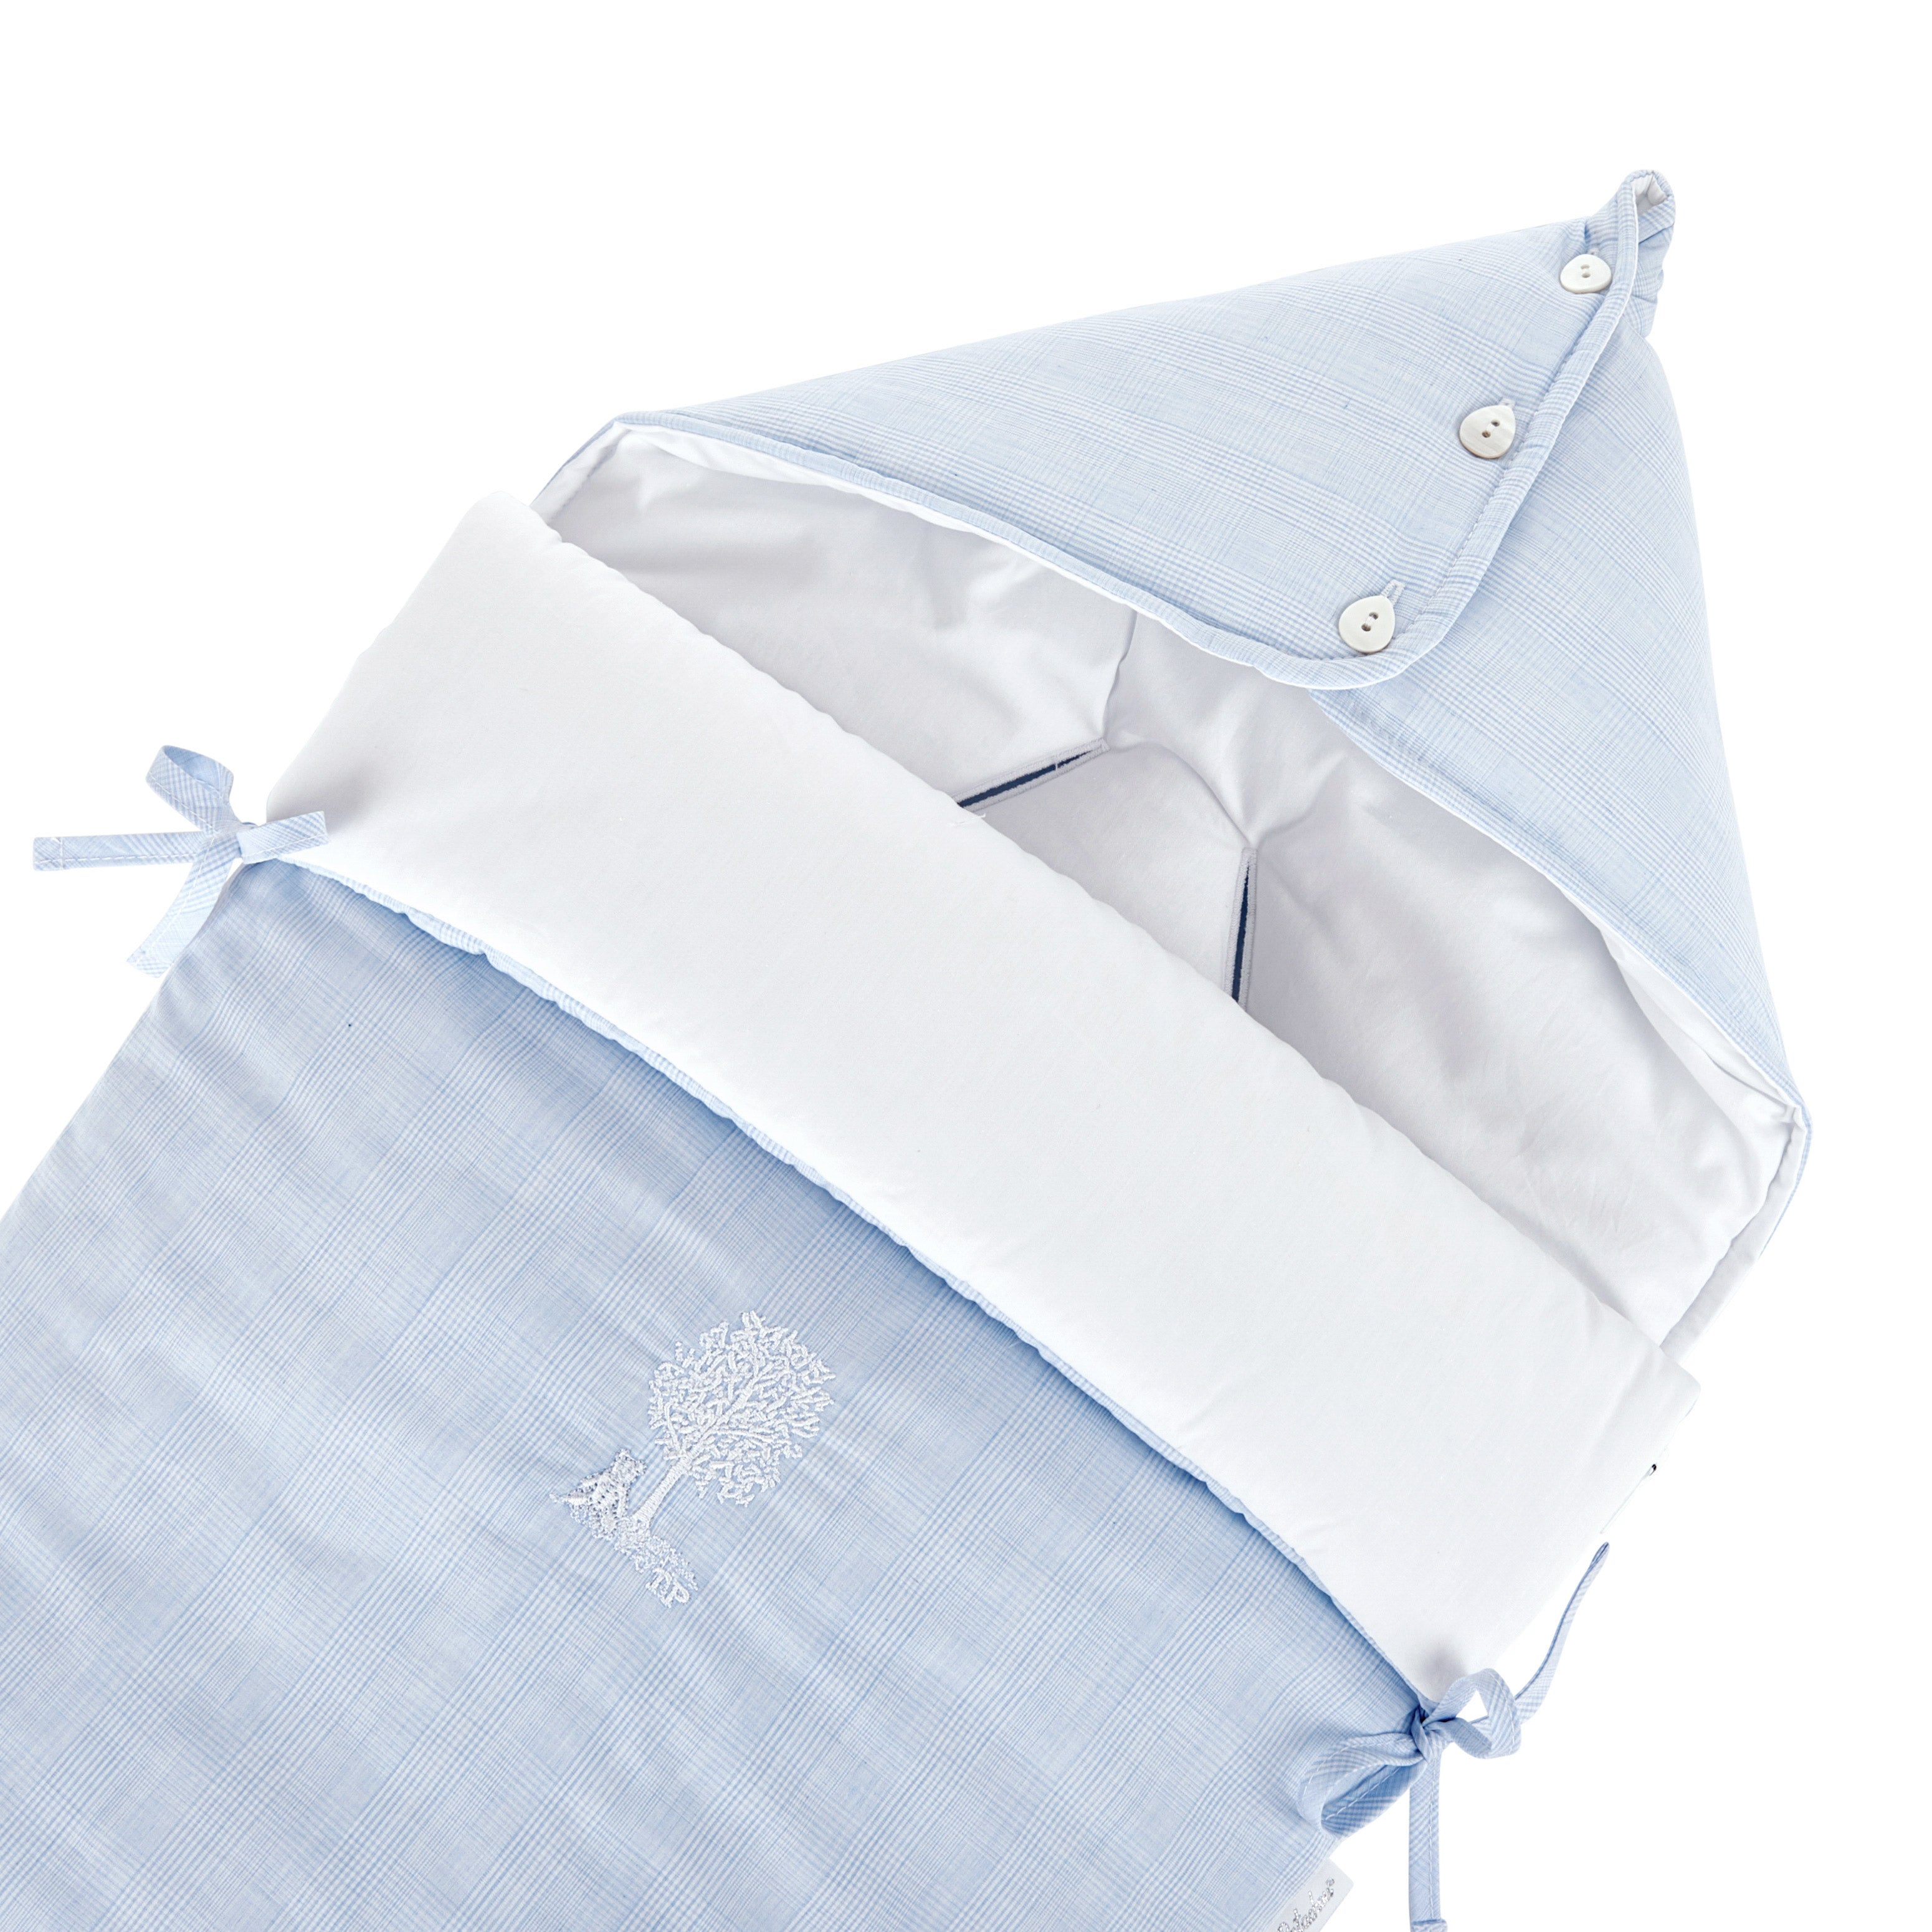 Theophile & Patachou Hooded Sleeping Bag for Car Seat “Pebble” - Sweet Blue